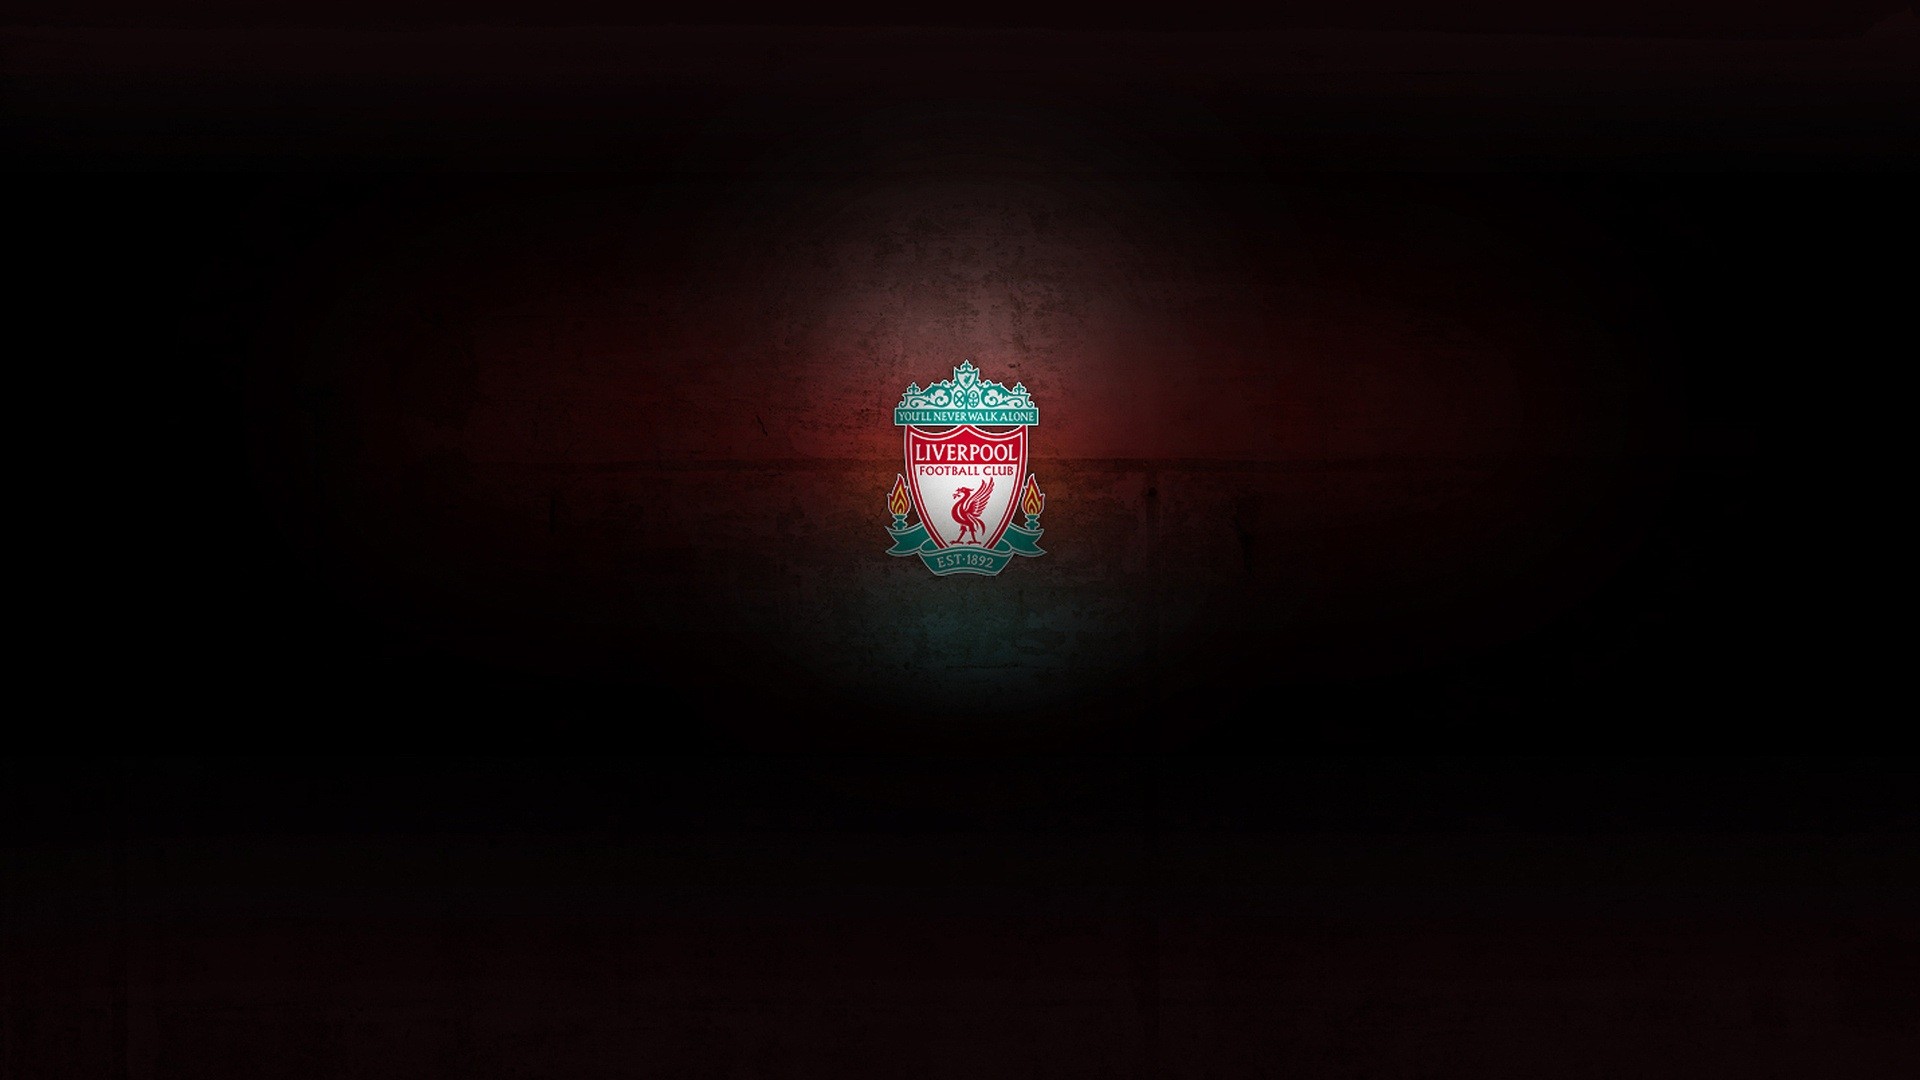 Liverpool Background Wallpaper HD - Live Wallpaper HD | Aztec wallpaper,  Wallpaper, Mac wallpaper